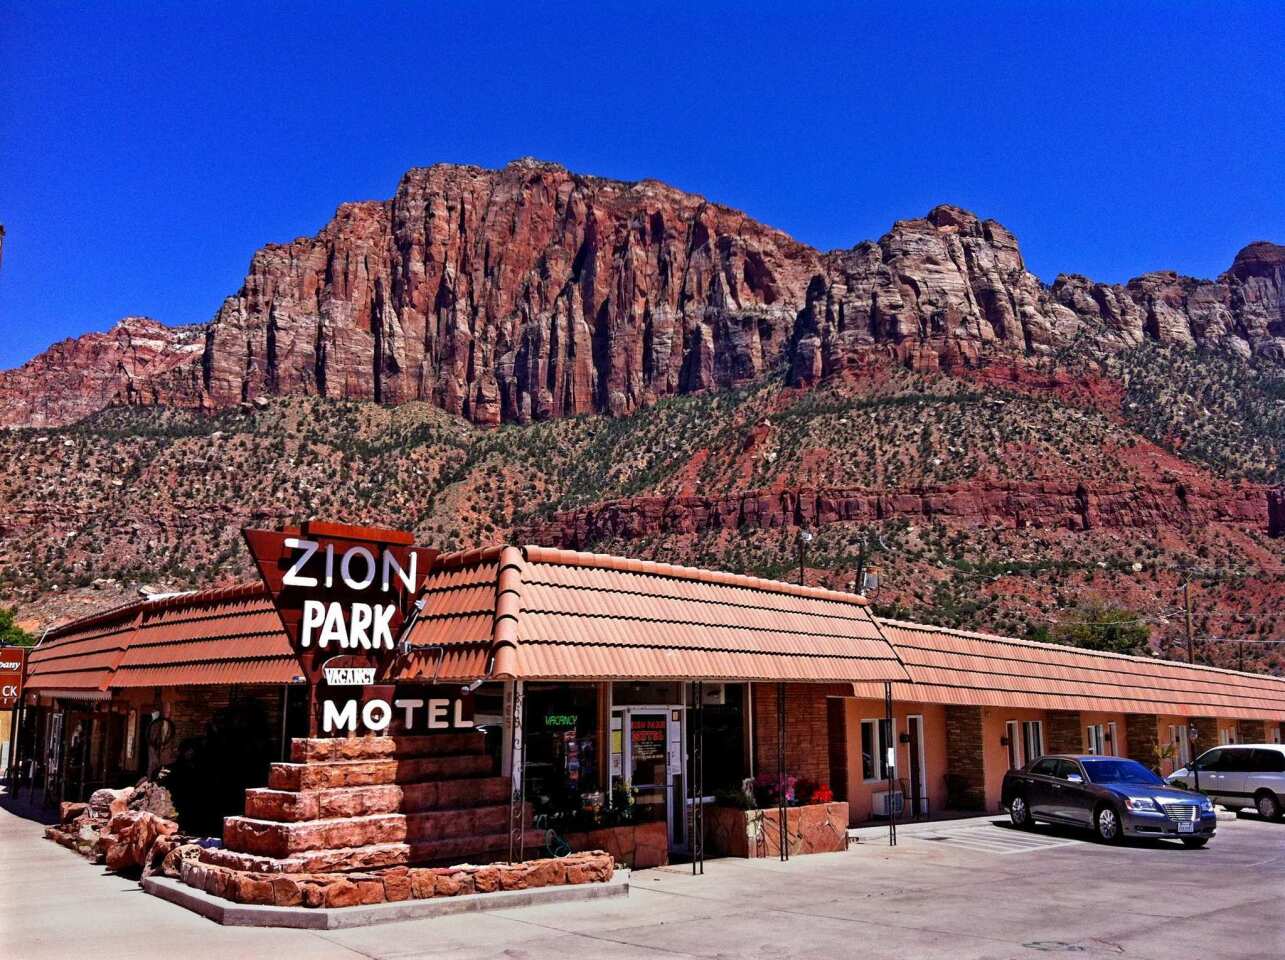 Towering red sandstone cliffs surround the low-slung Zion Park Motel in Springdale, Utah, built in 1972 and just a mile from the national park.